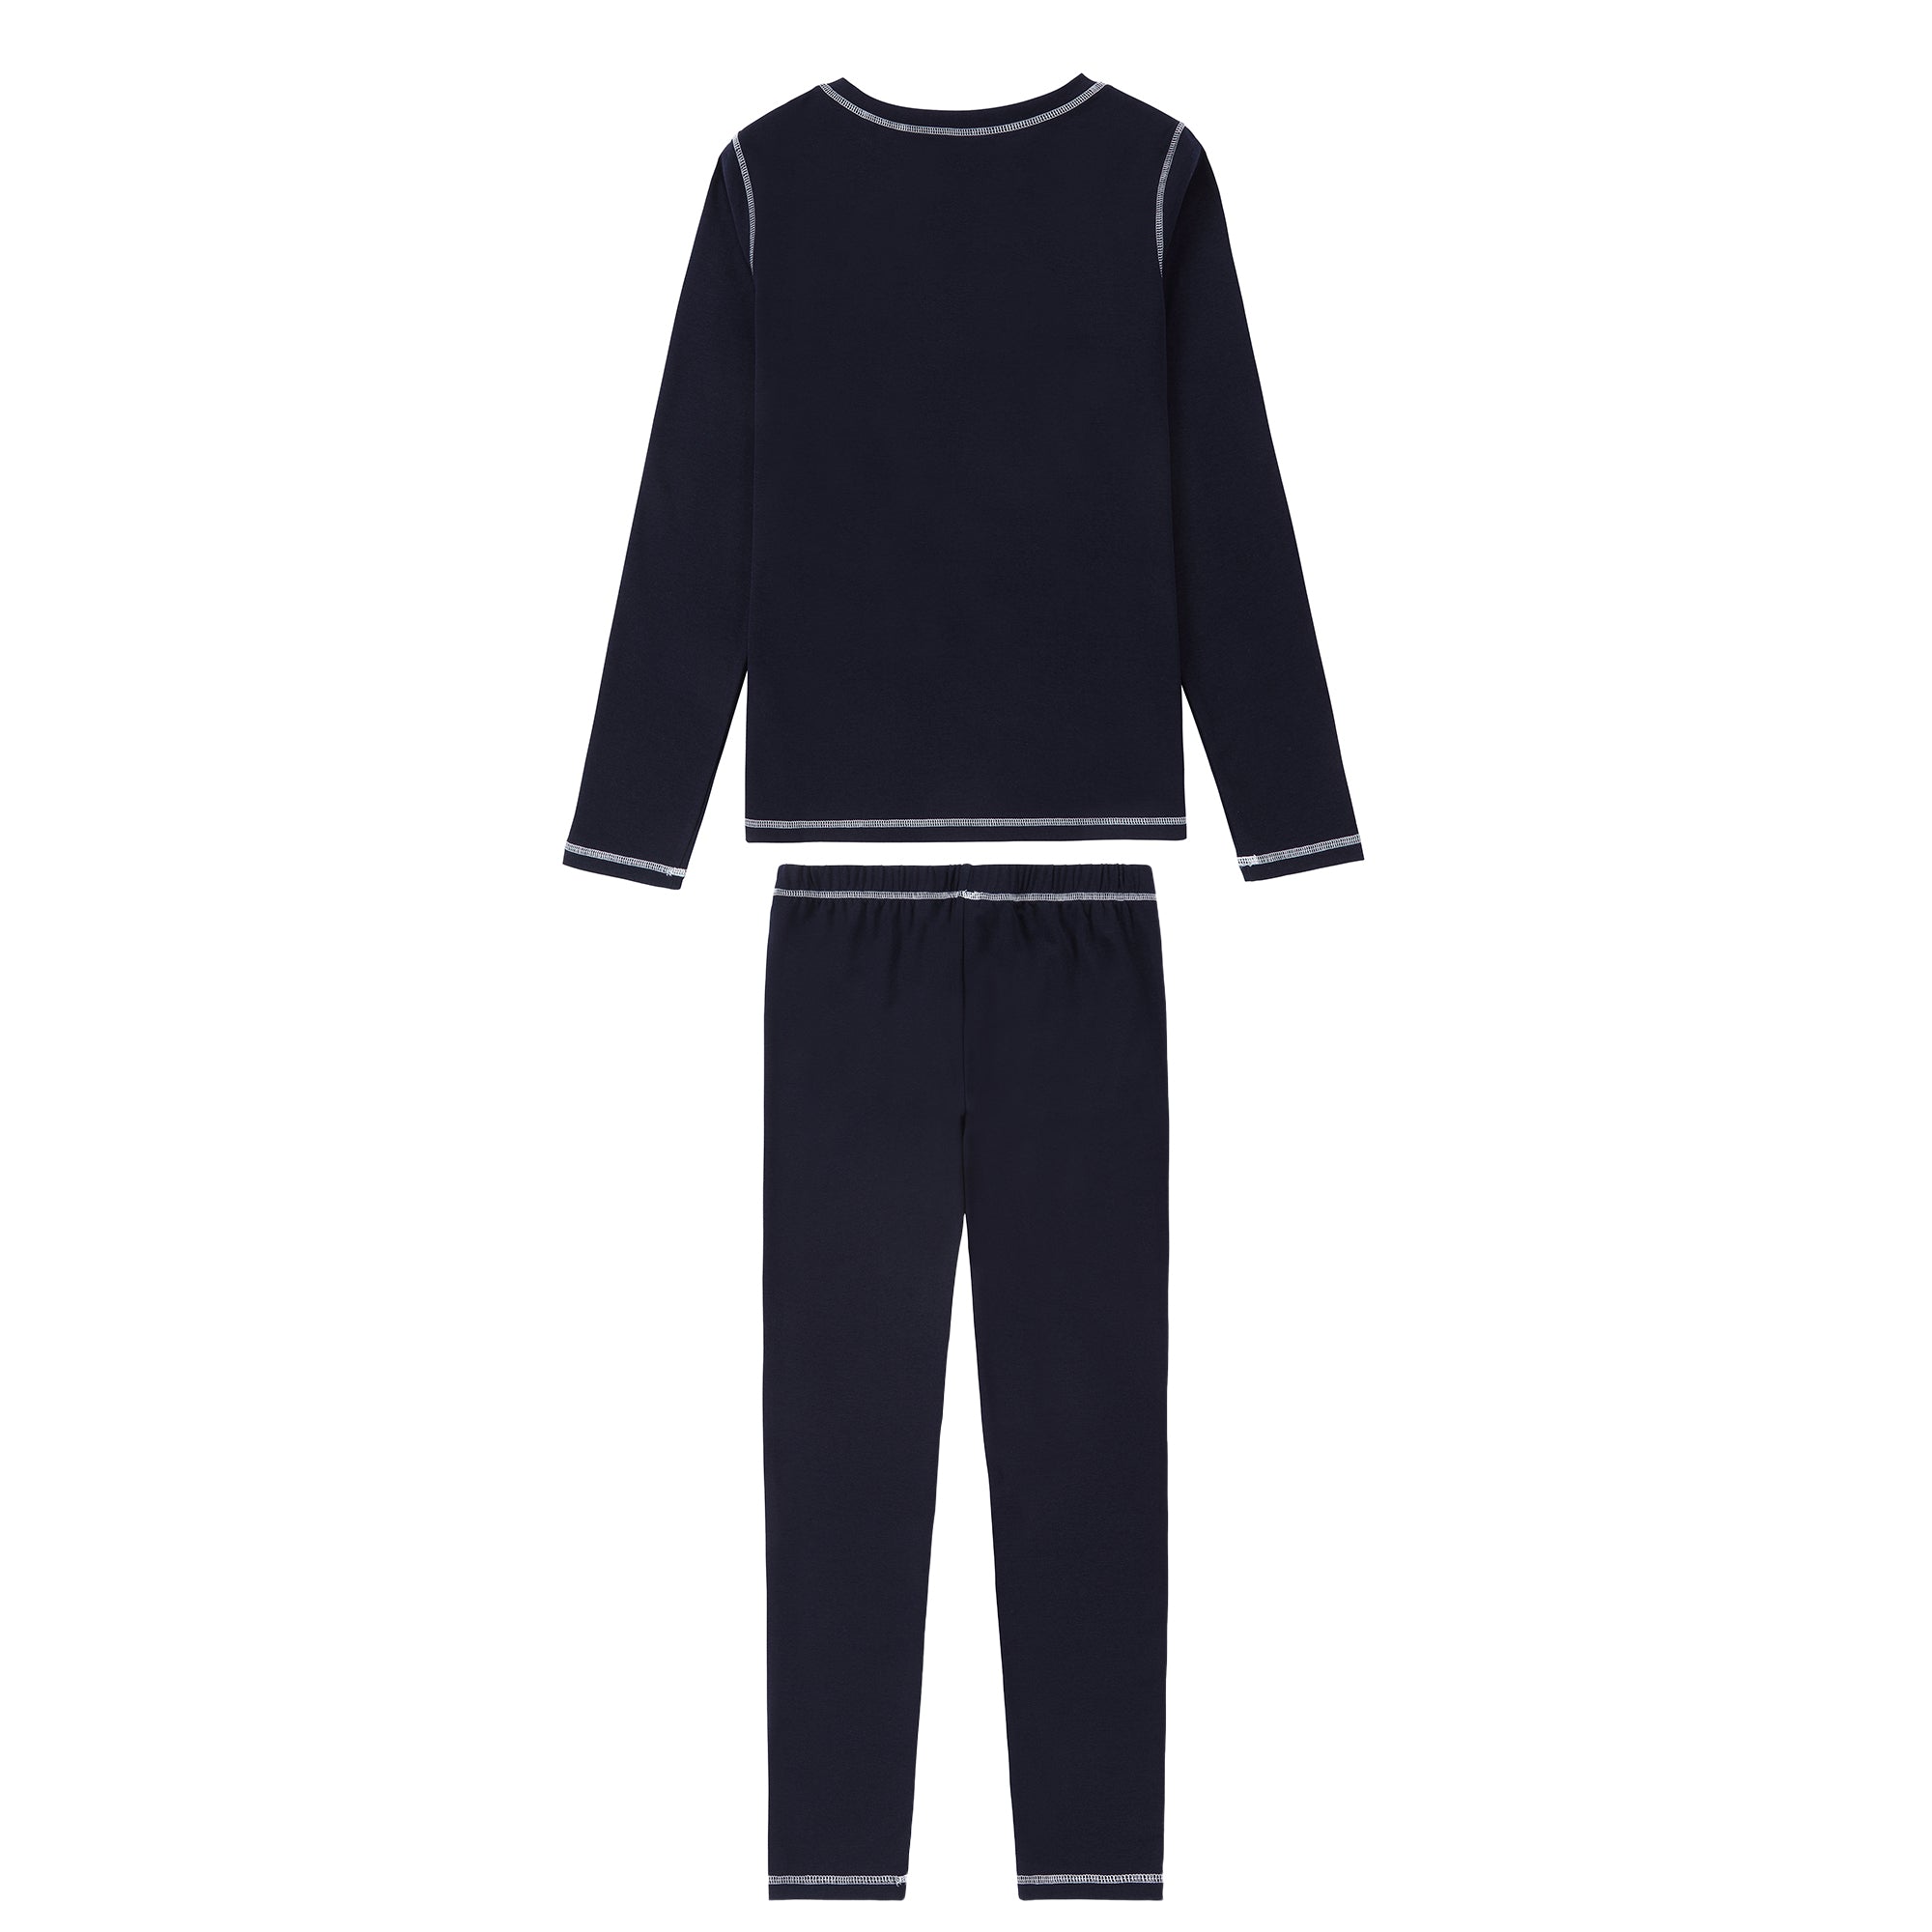 Navy V-Neck Pajama With White Accents